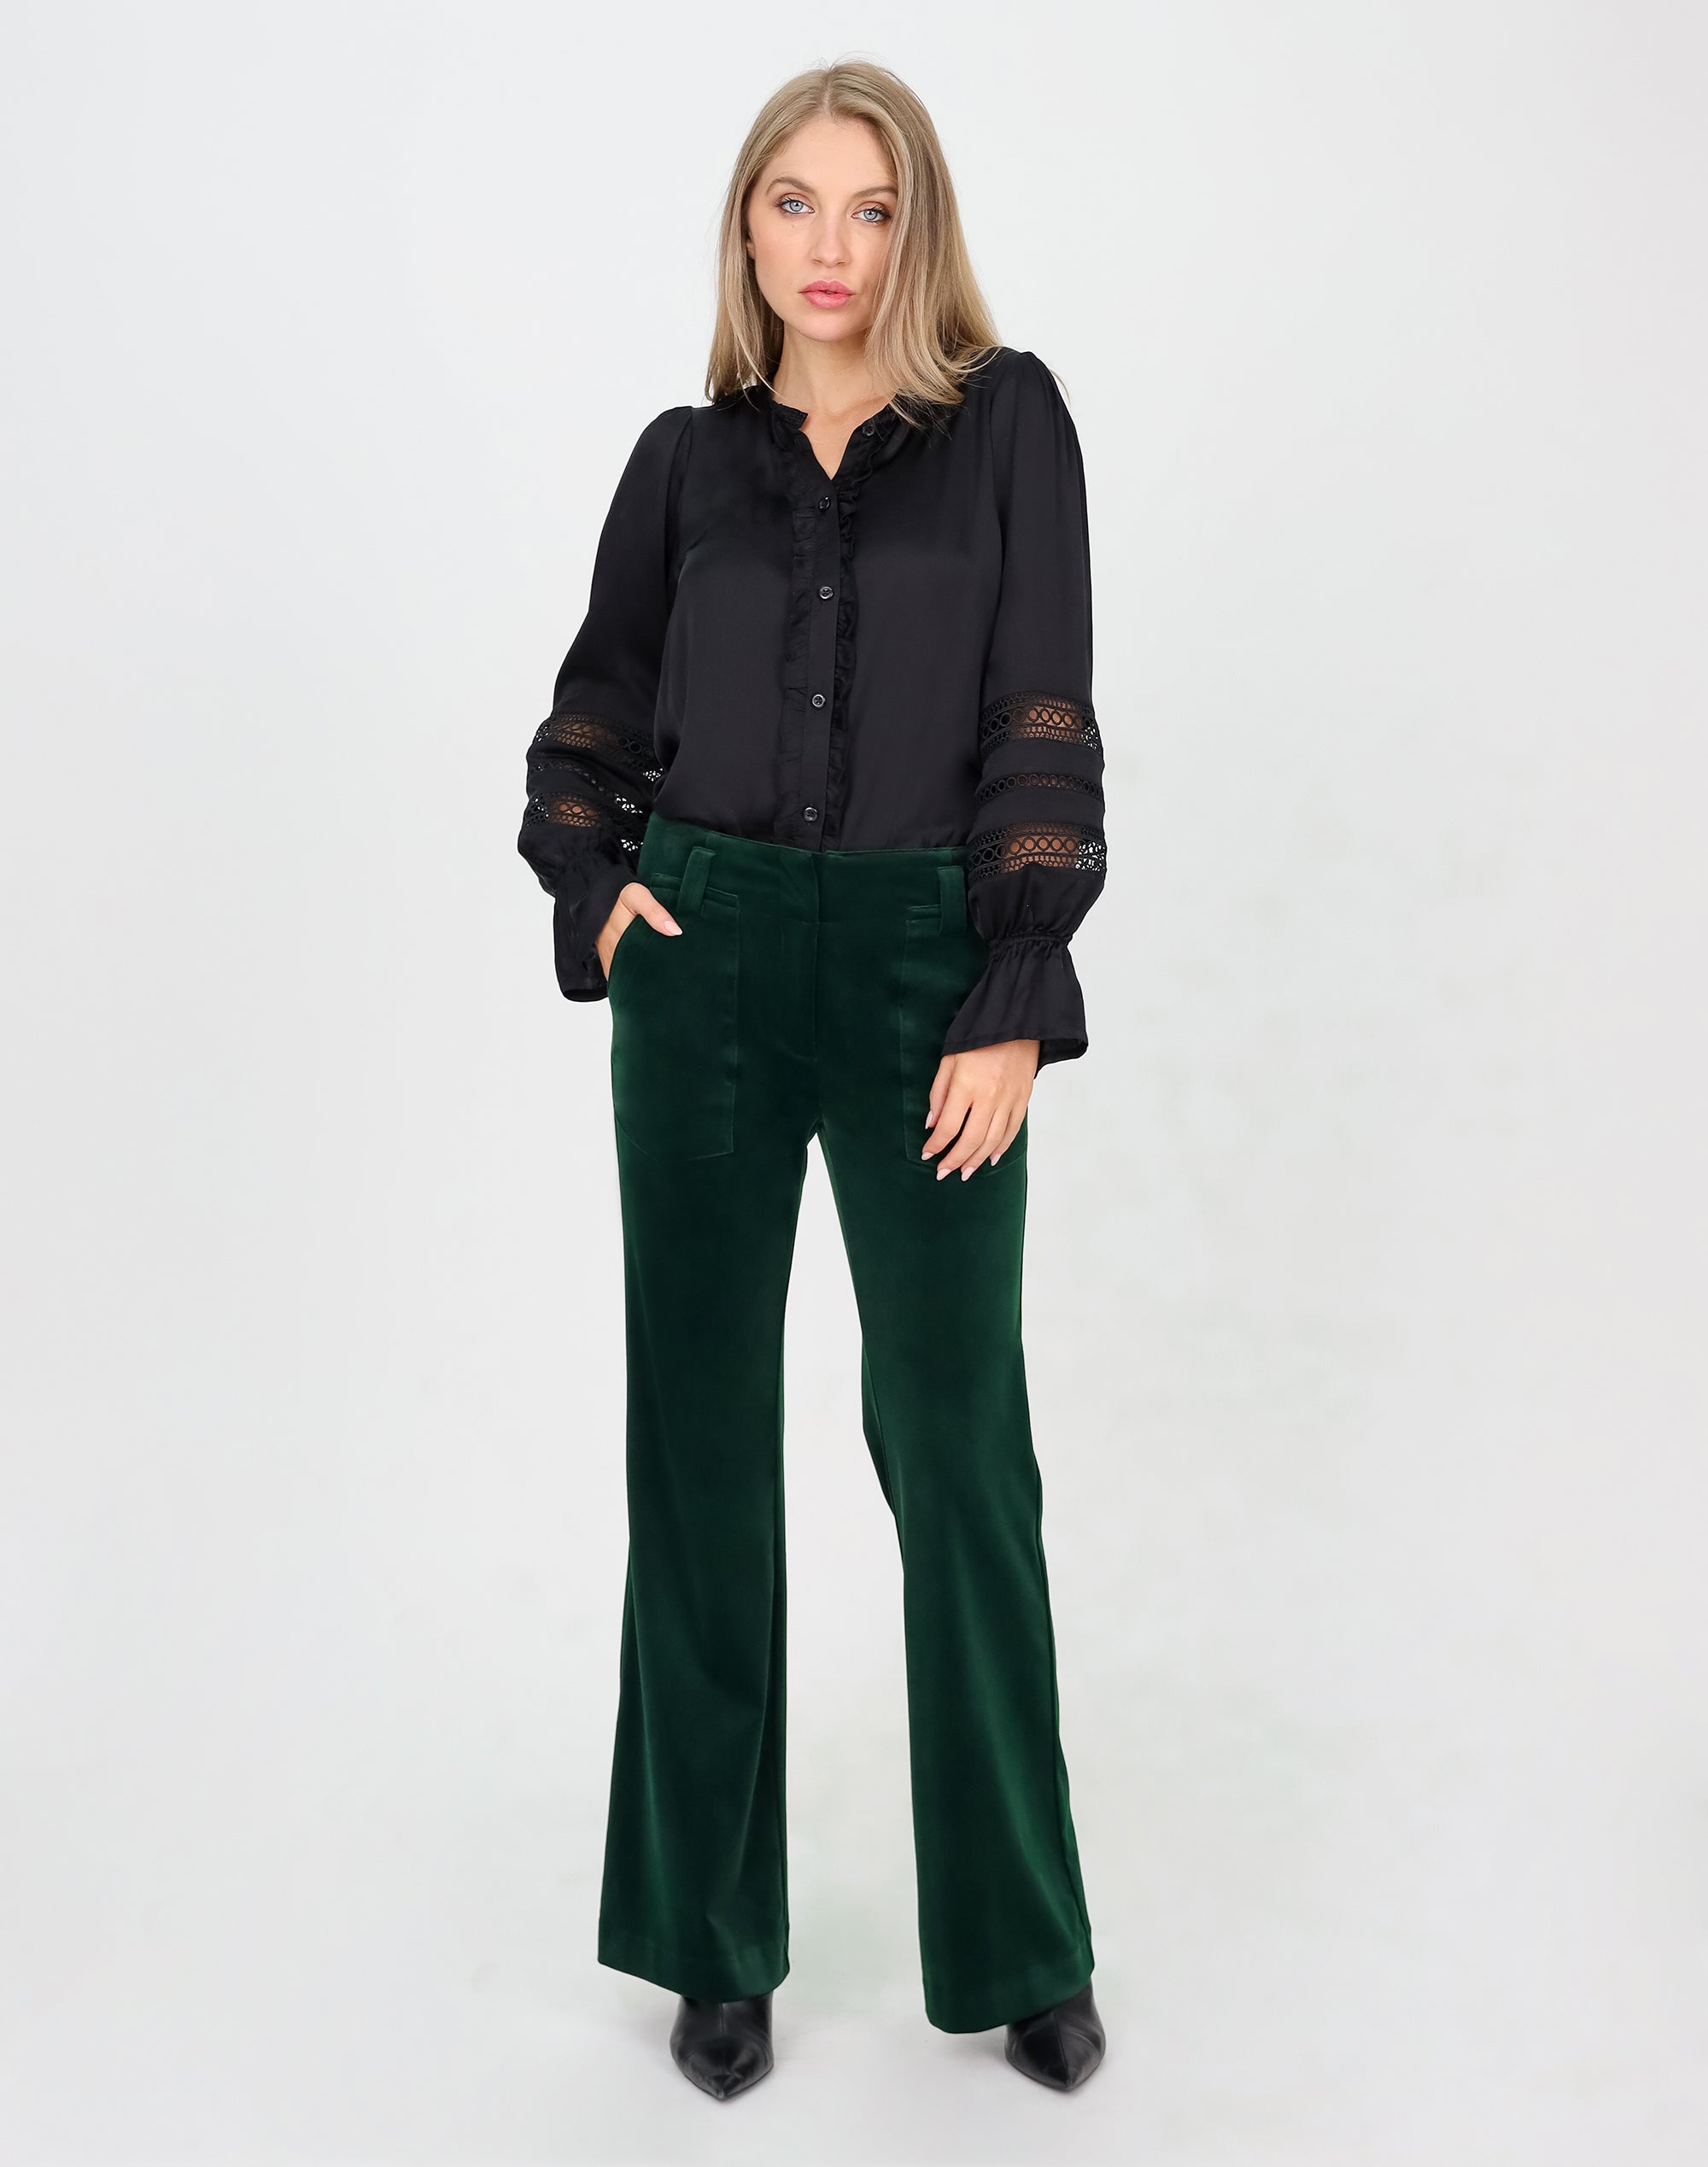 Shae by SASSAFRAS Relaxed Women Green Trousers - Buy Shae by SASSAFRAS  Relaxed Women Green Trousers Online at Best Prices in India | Flipkart.com